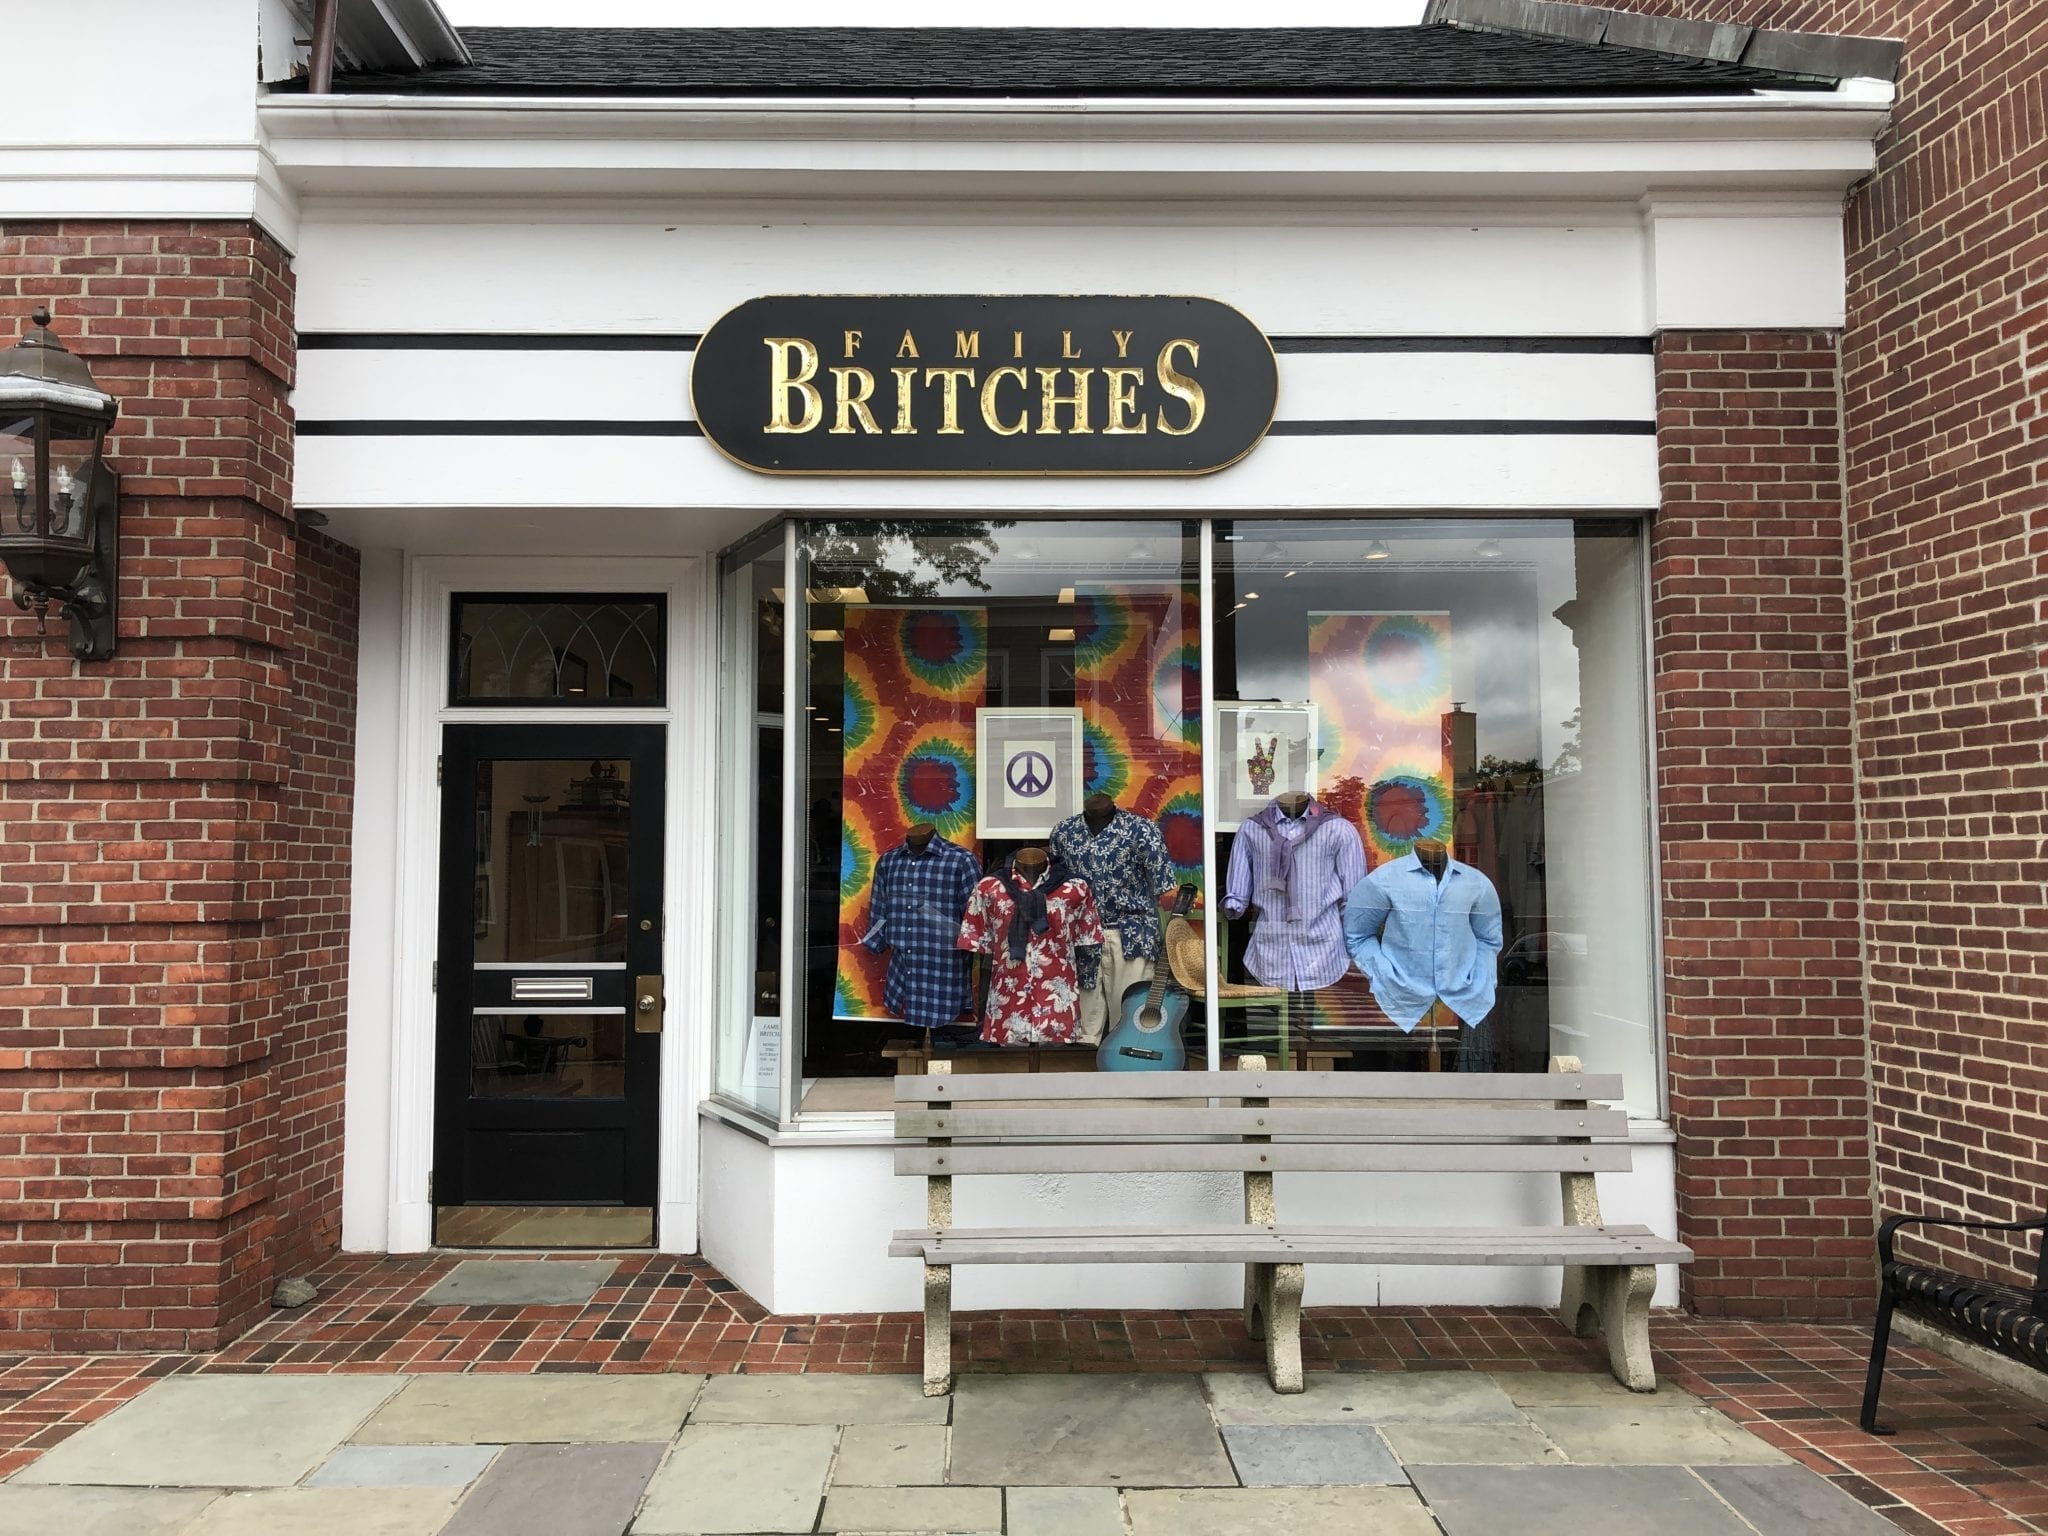 Family Britches New Canaan storefront